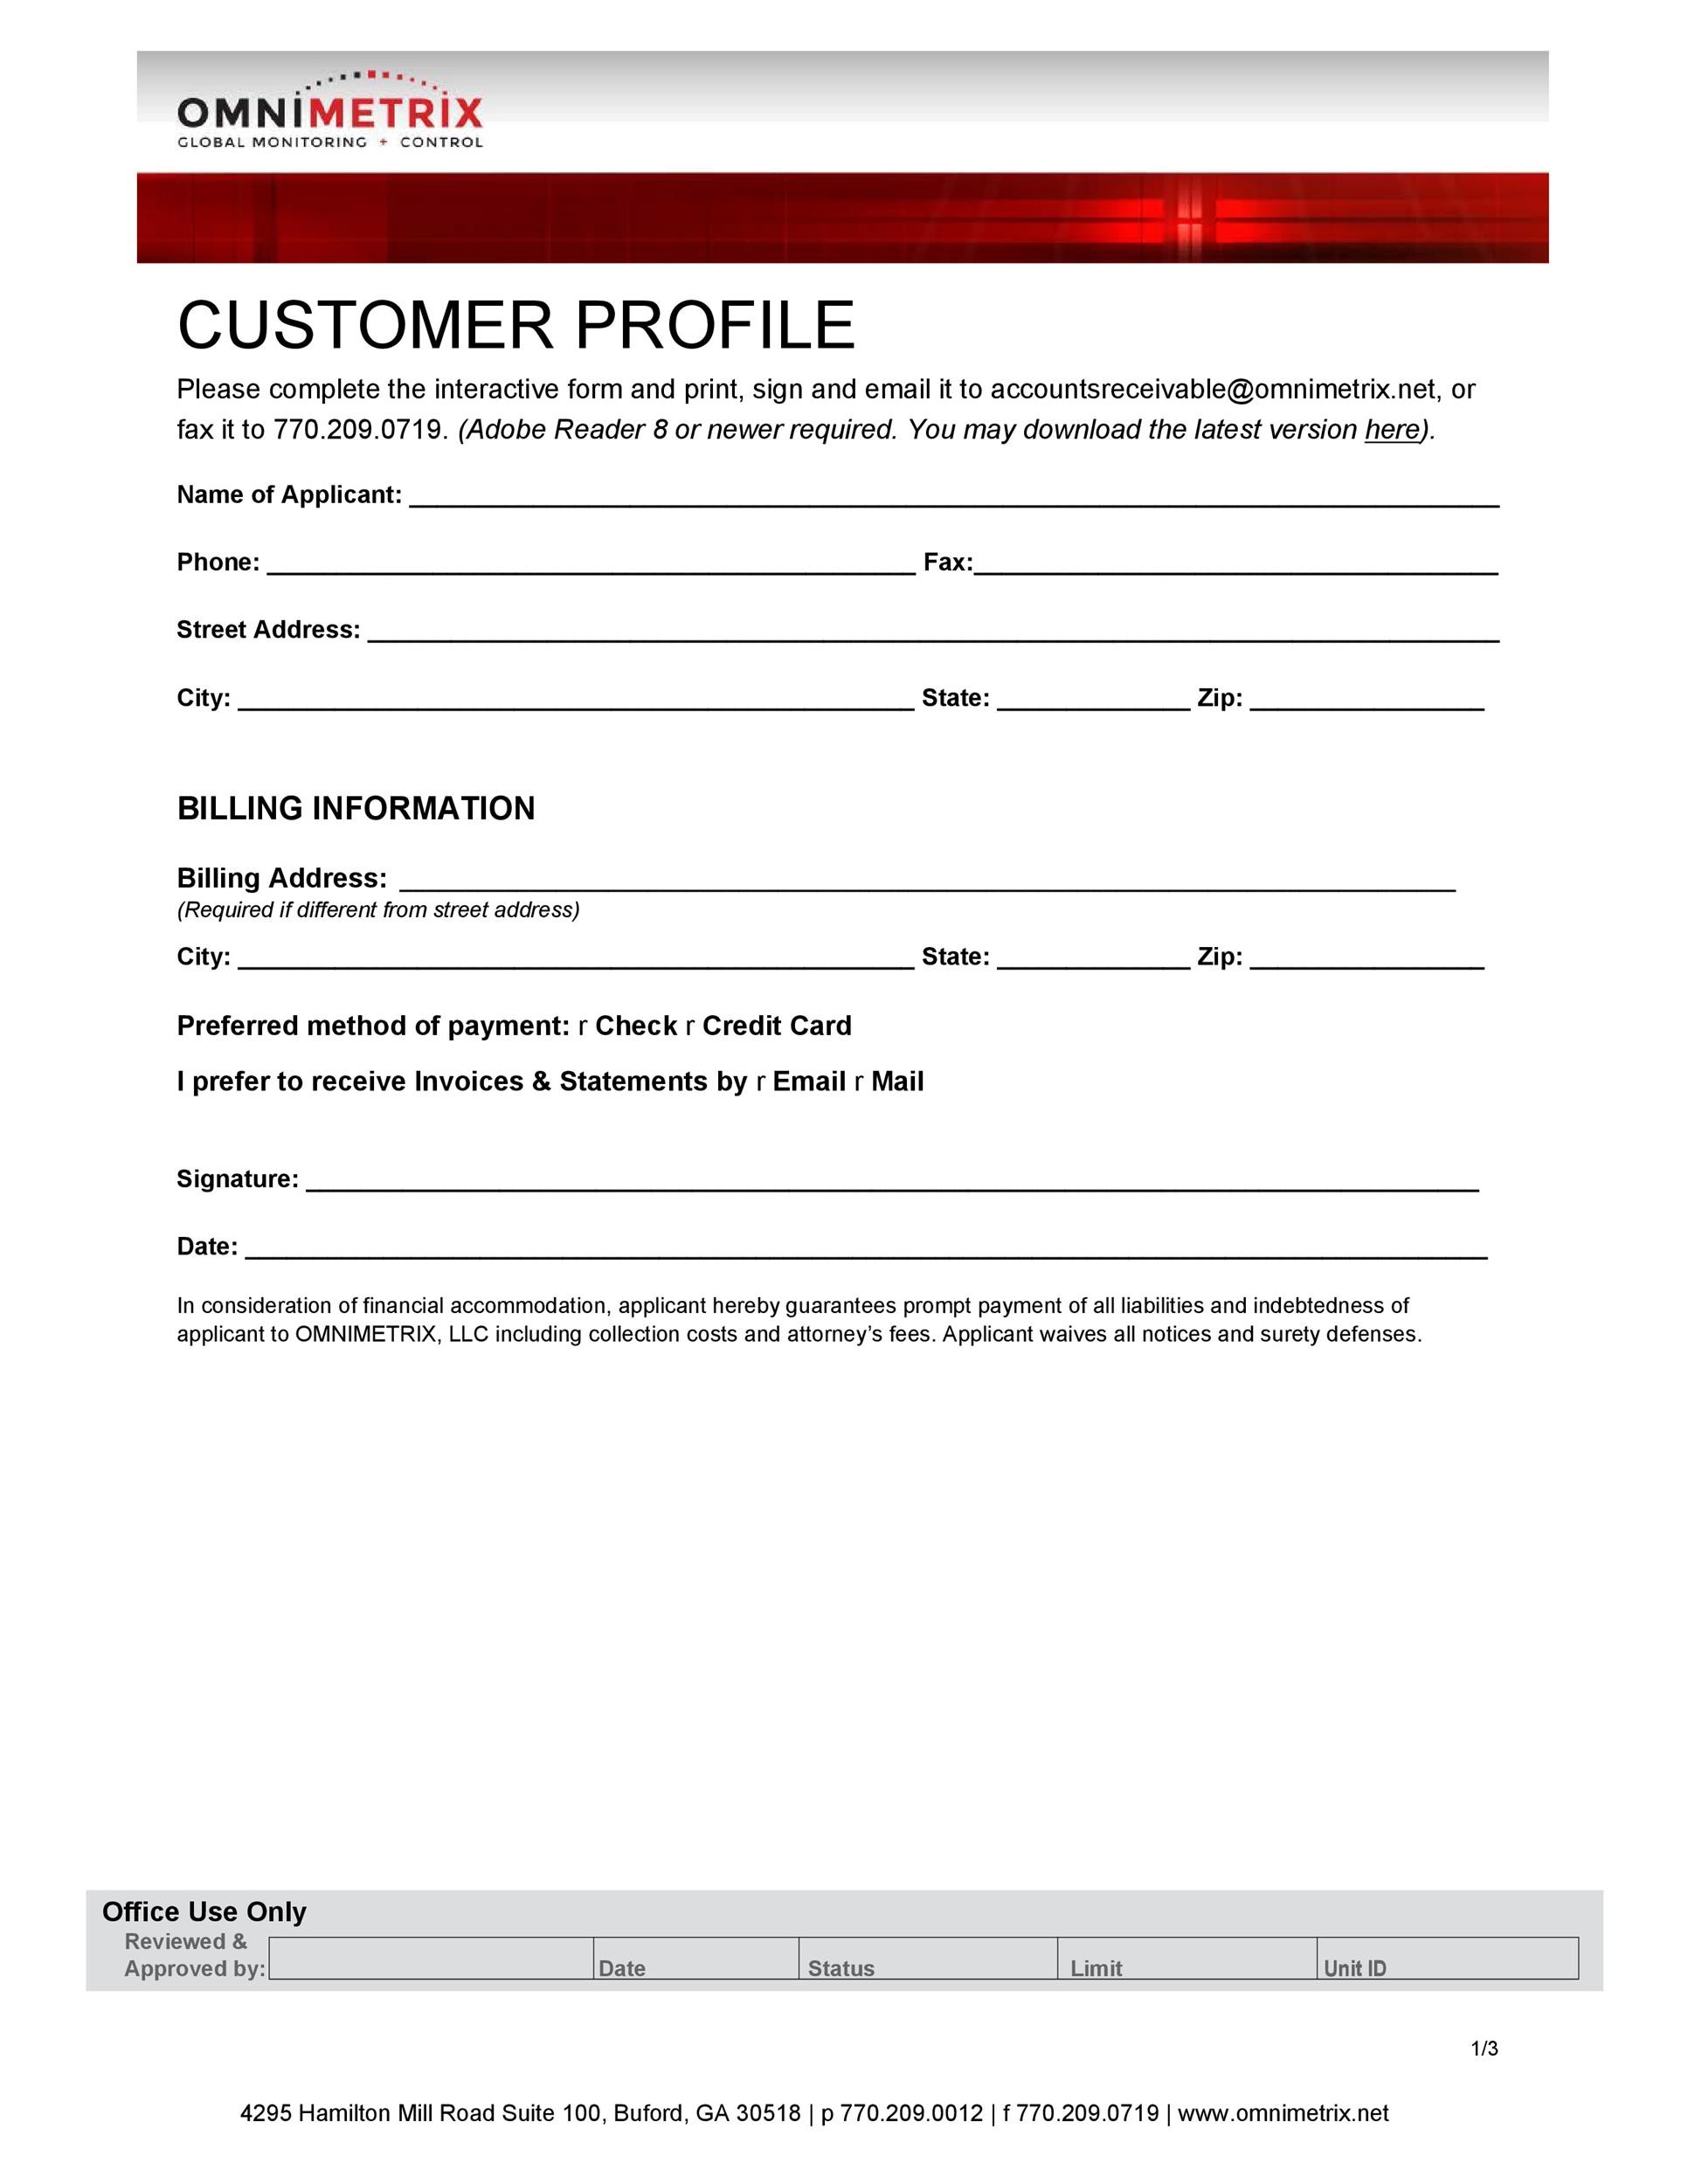 Customer profile template free download kemono party download